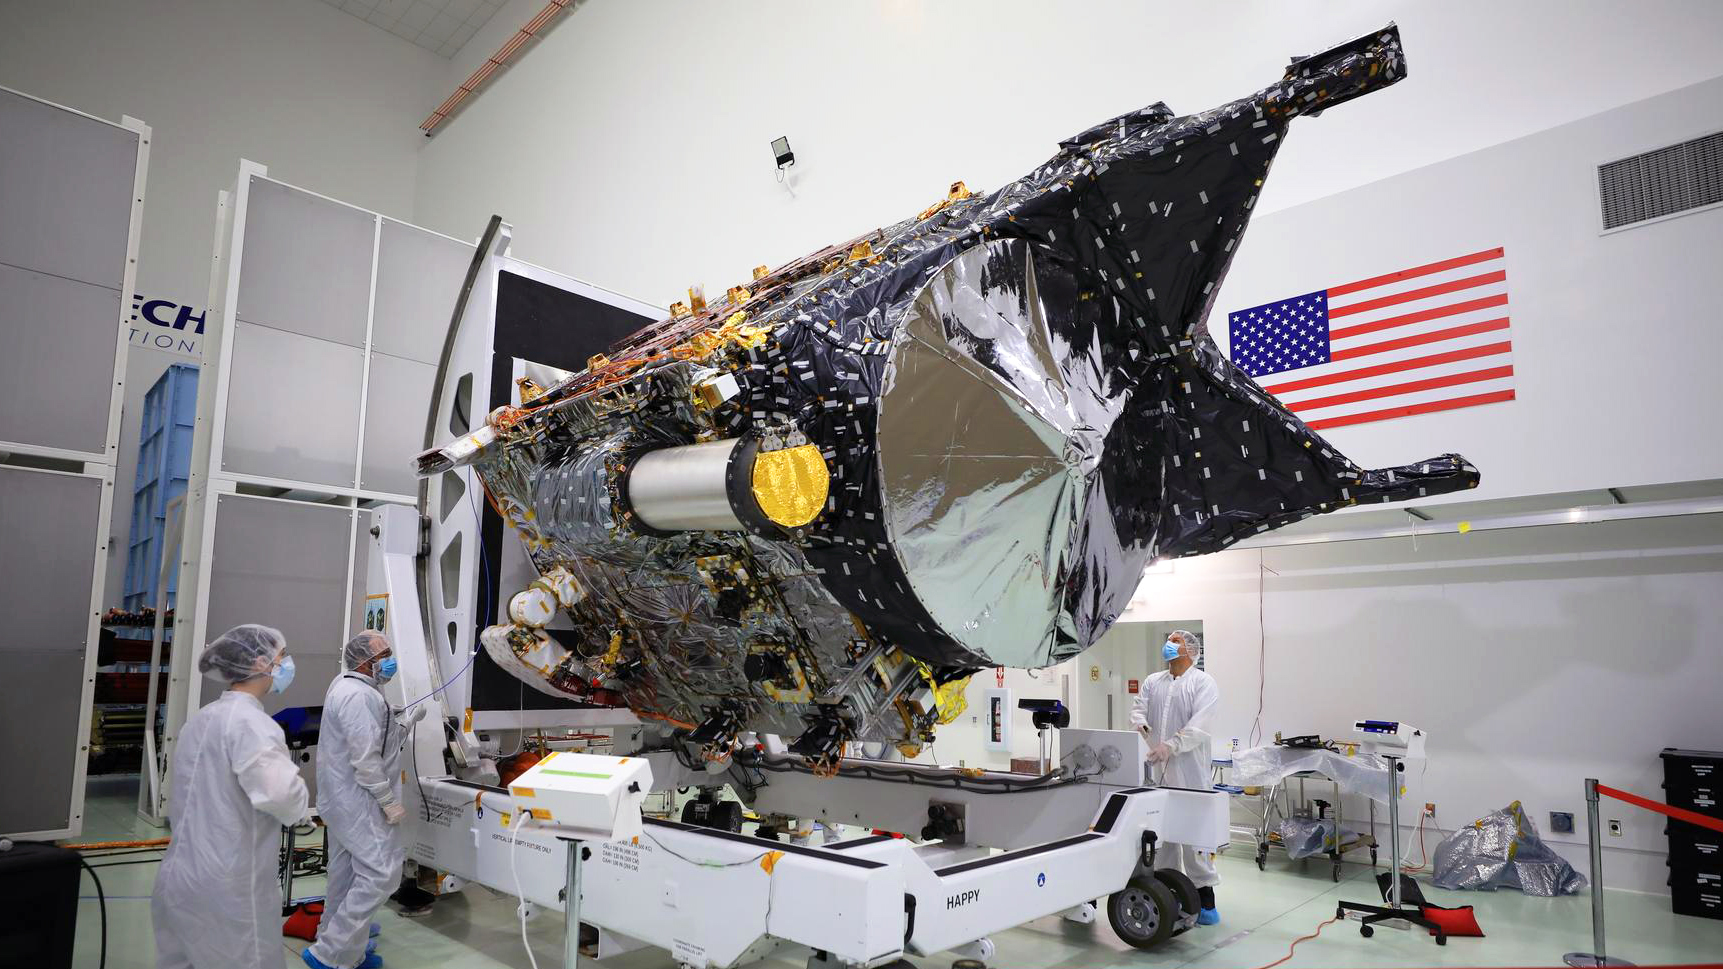 NASA’s Psyche spacecraft is shown in a white room at the Astrotech Space Operations facility. DSOC’s gold-capped flight laser transceiver can be seen, near center, attached to the spacecraft.